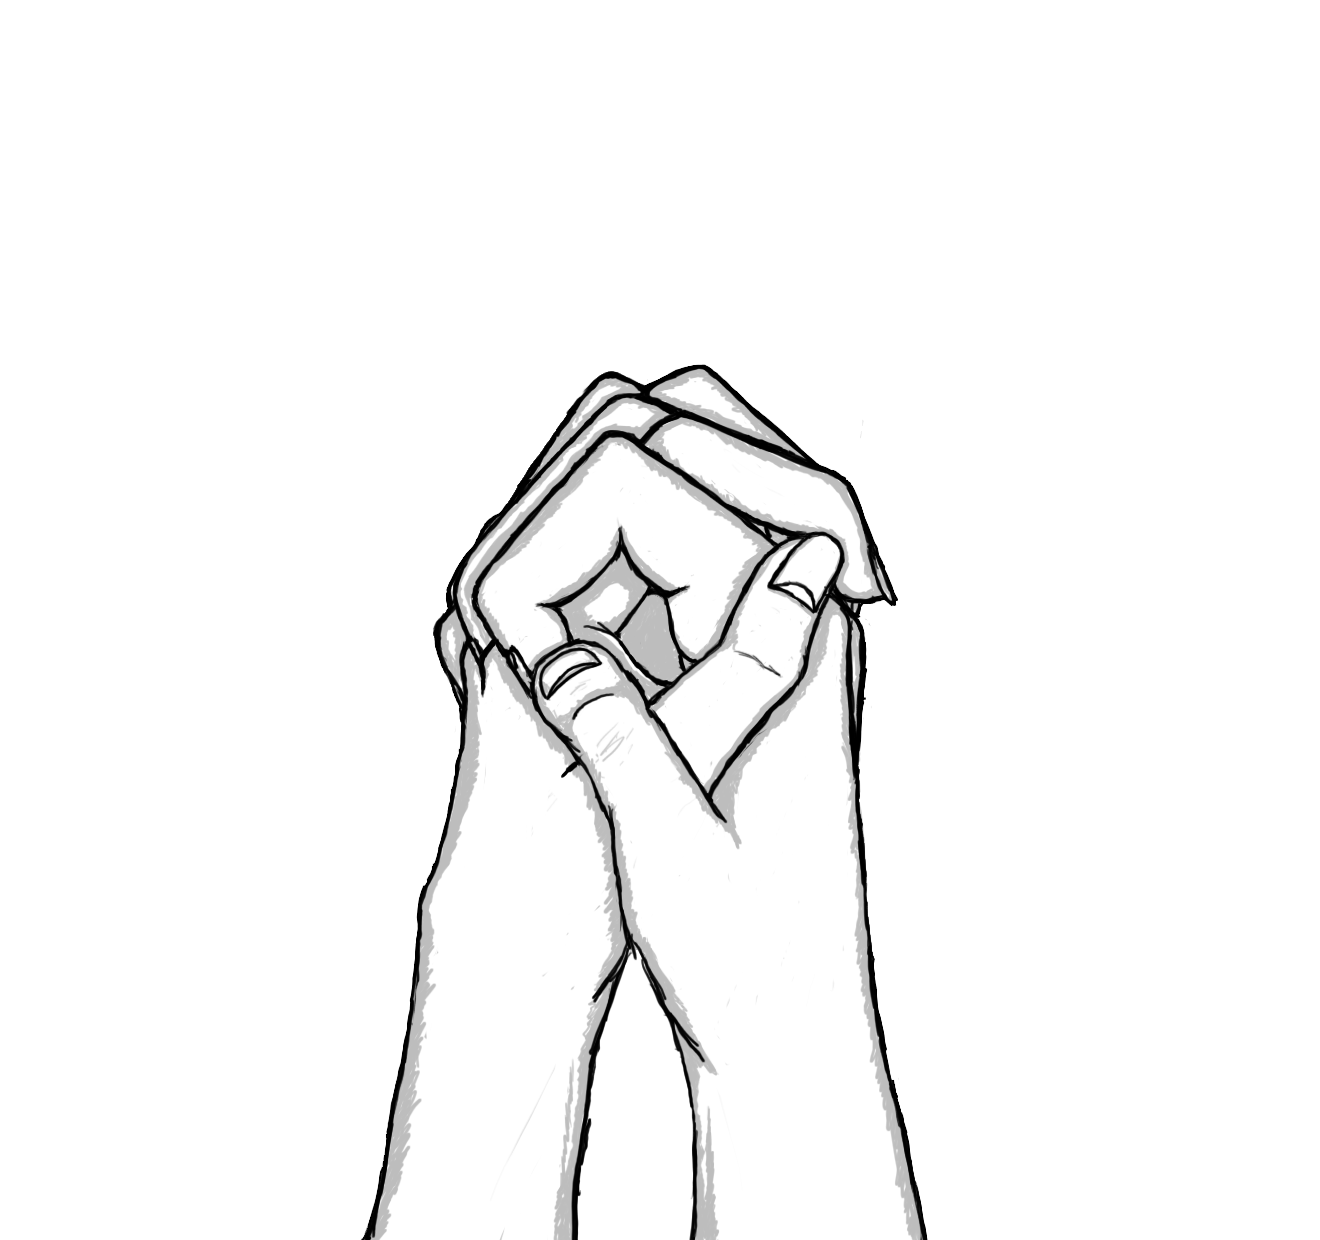 Drawings Of People Holding Hands - Clipart library